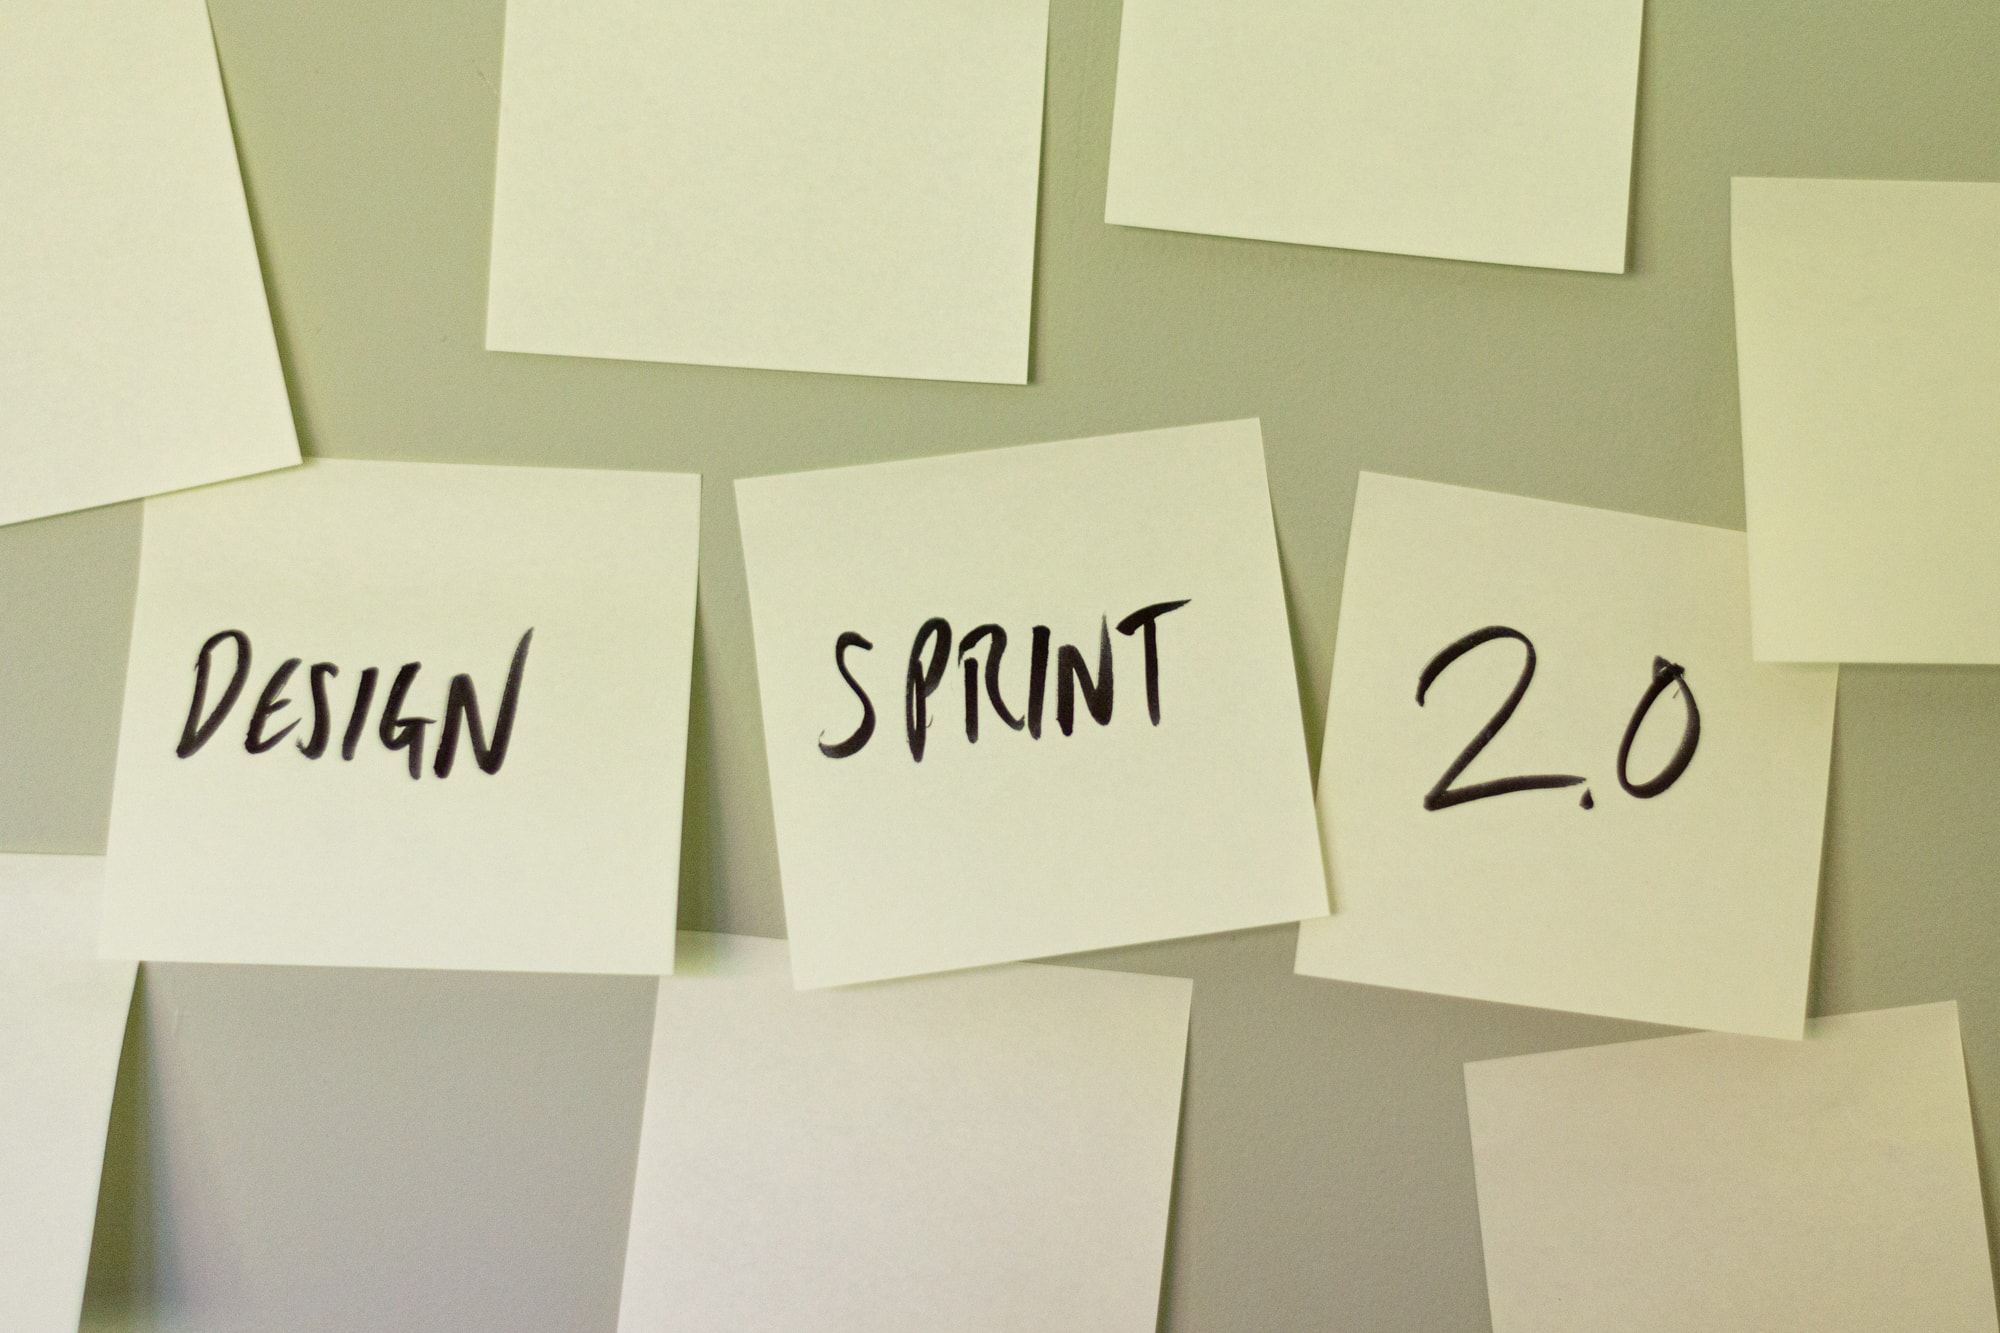 Design sprint 2.0 on post it notes